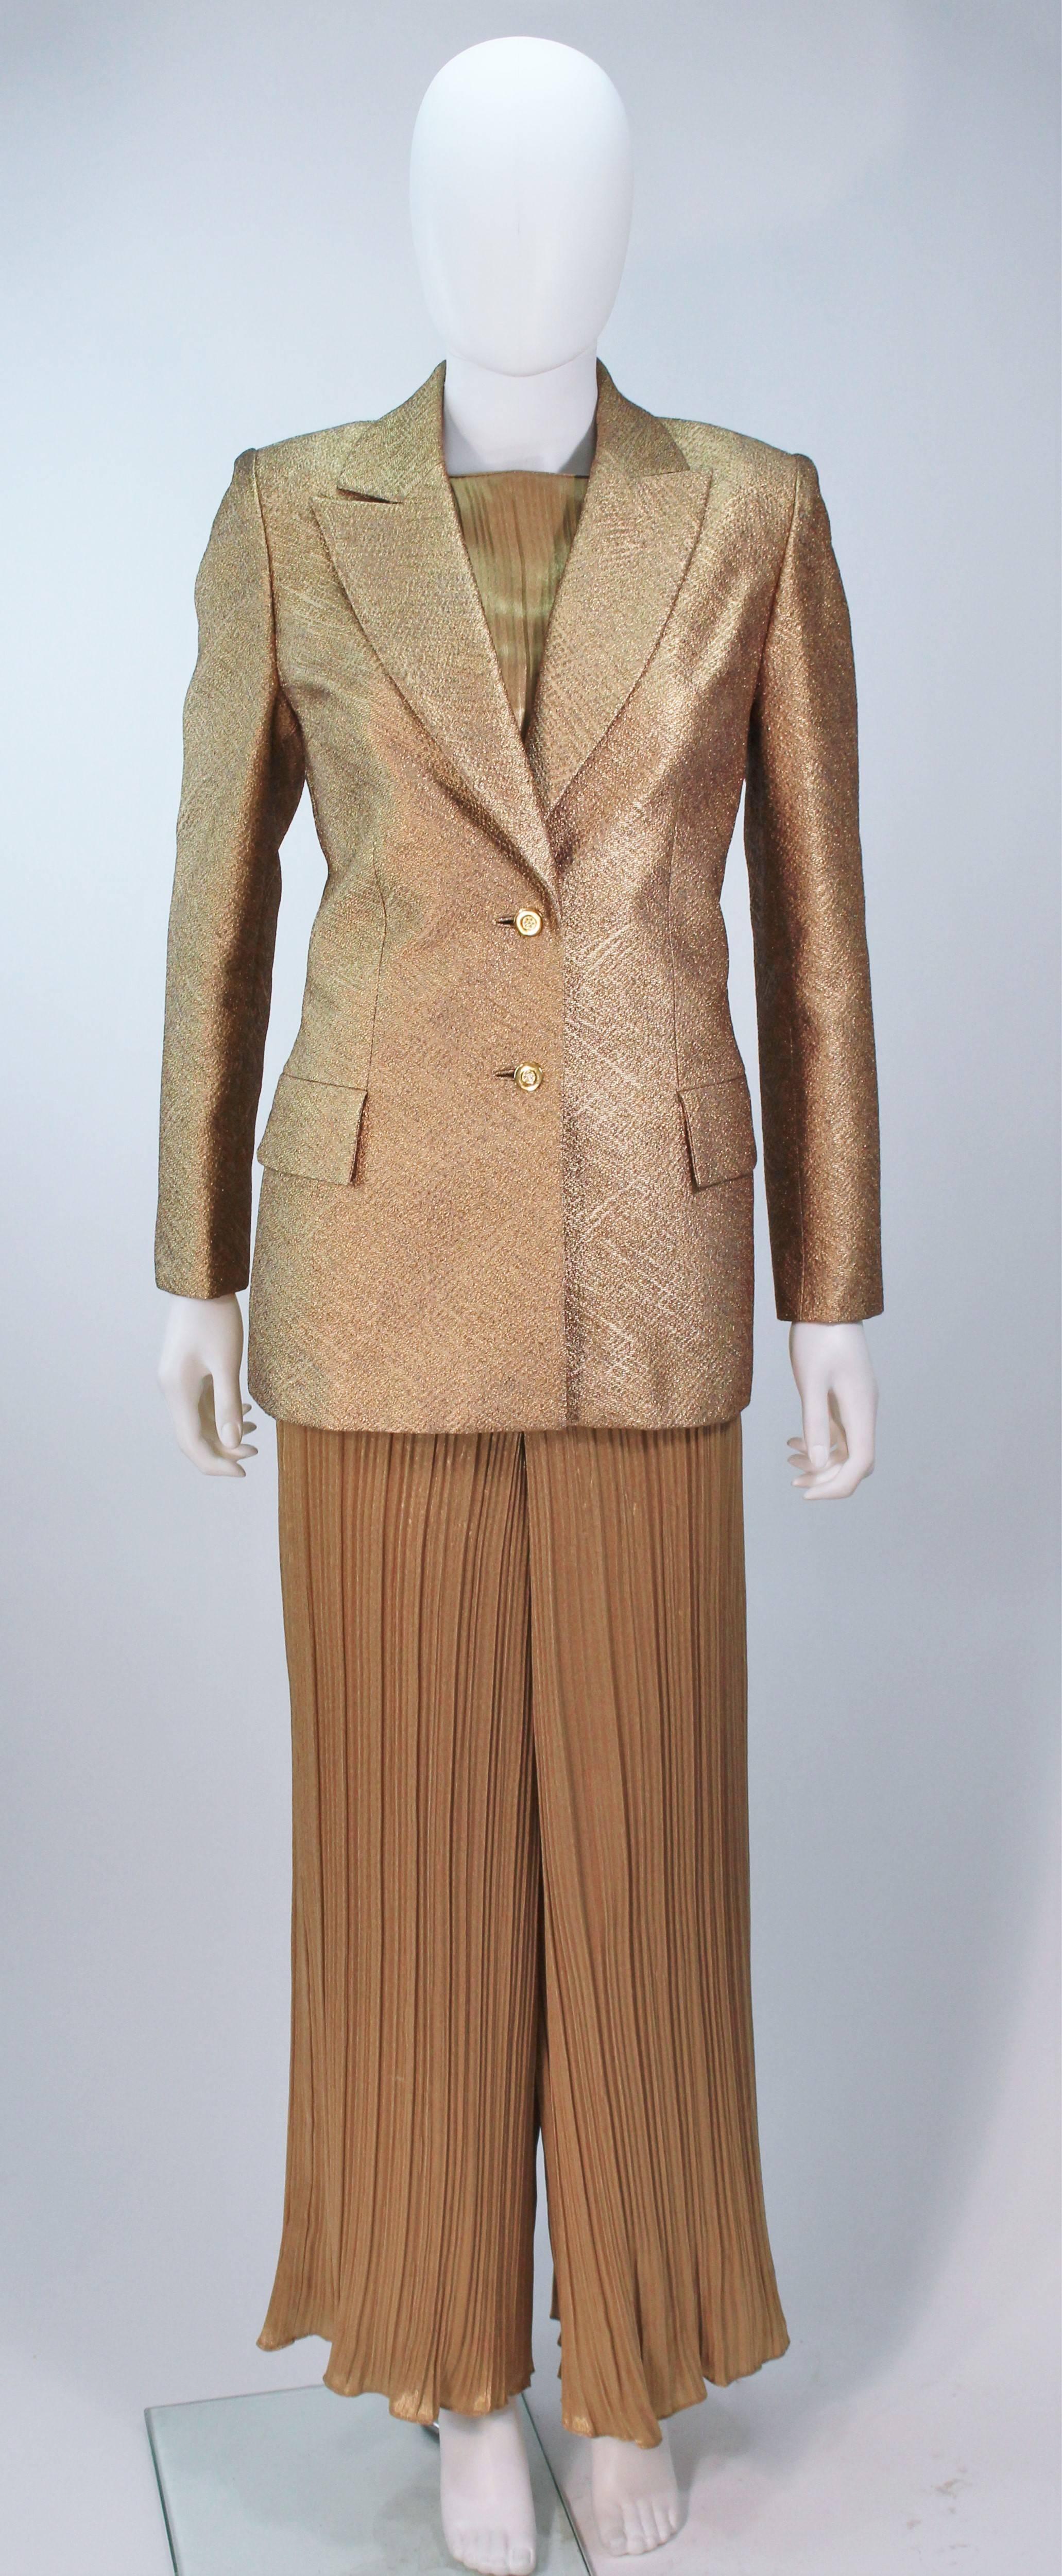  This Travilla pantsuit is composed of metallic silk Lame, with gold hardware. The jacket has center front button closures. The pants have a center back zipper closure. In excellent vintage condition. 

  **Please cross-reference measurements for